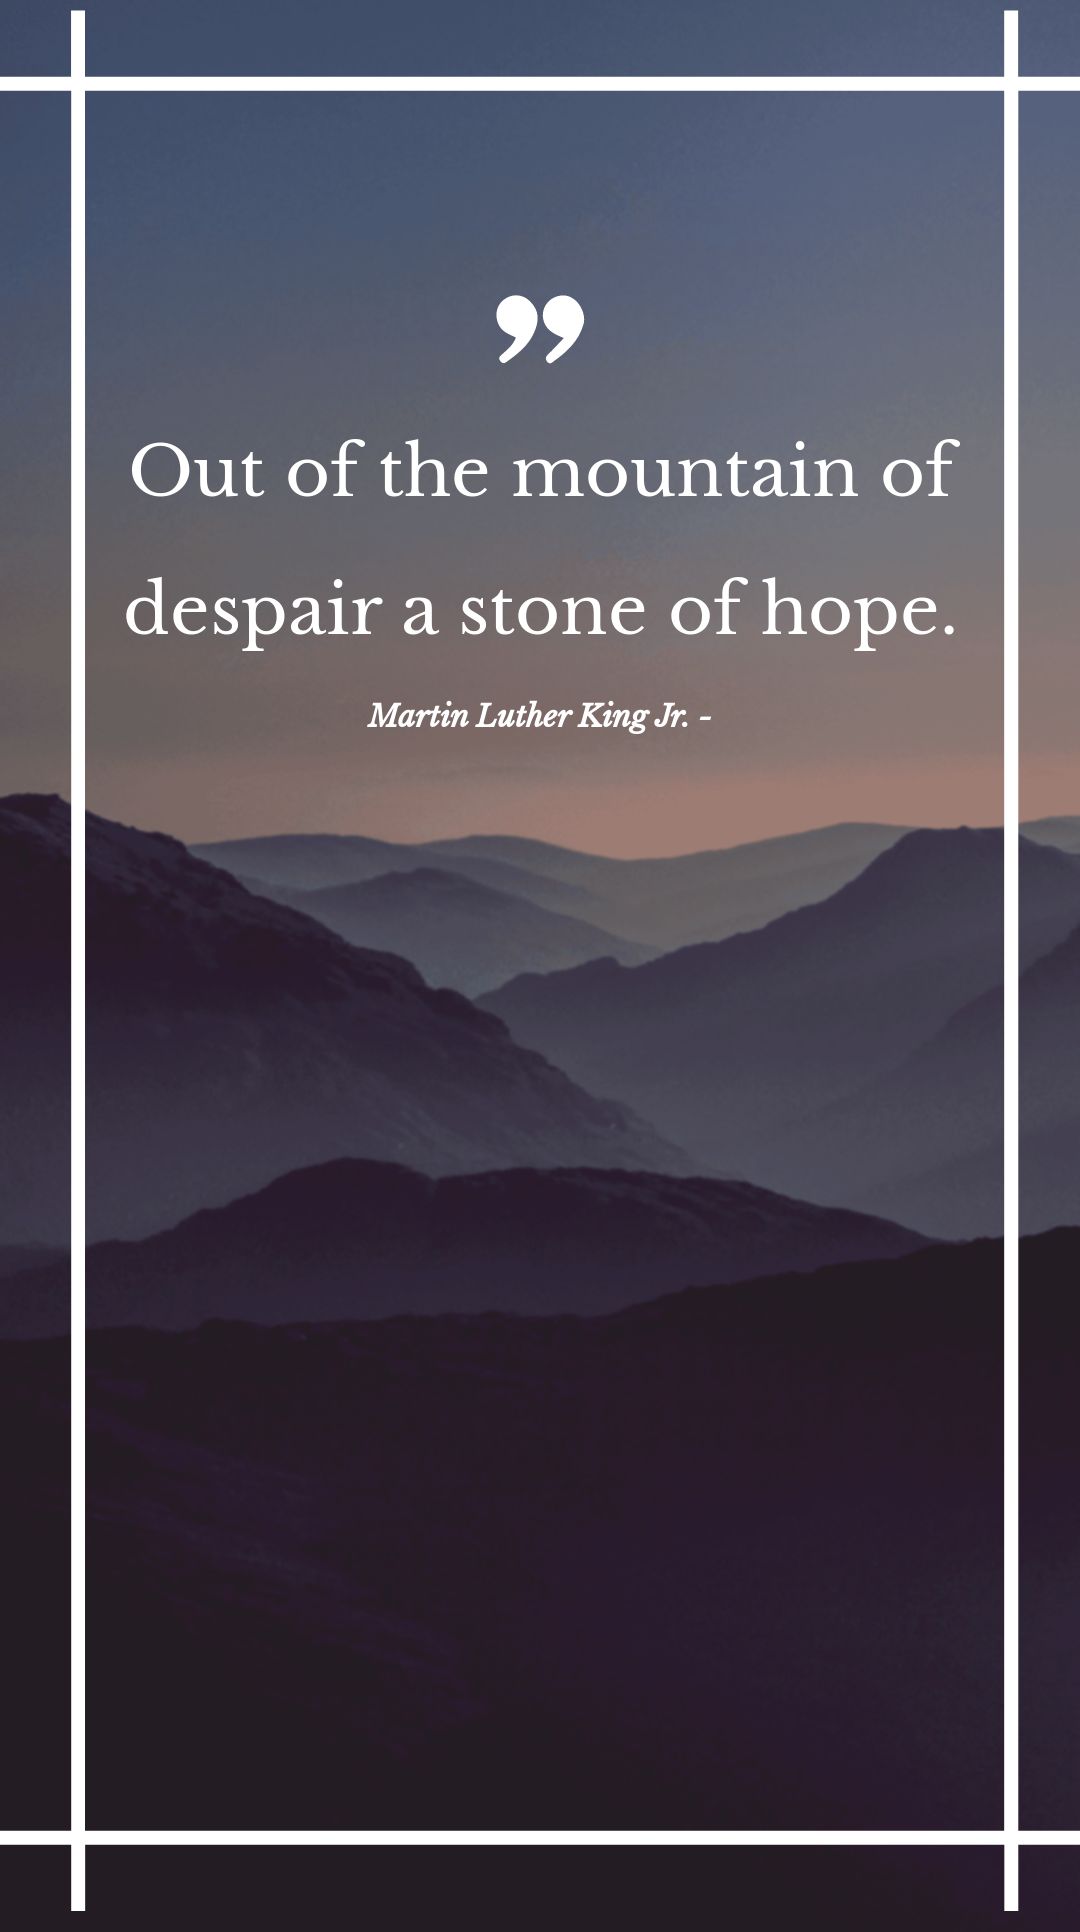 Martin Luther King Jr. - Out of the mountain of despair a stone of hope.